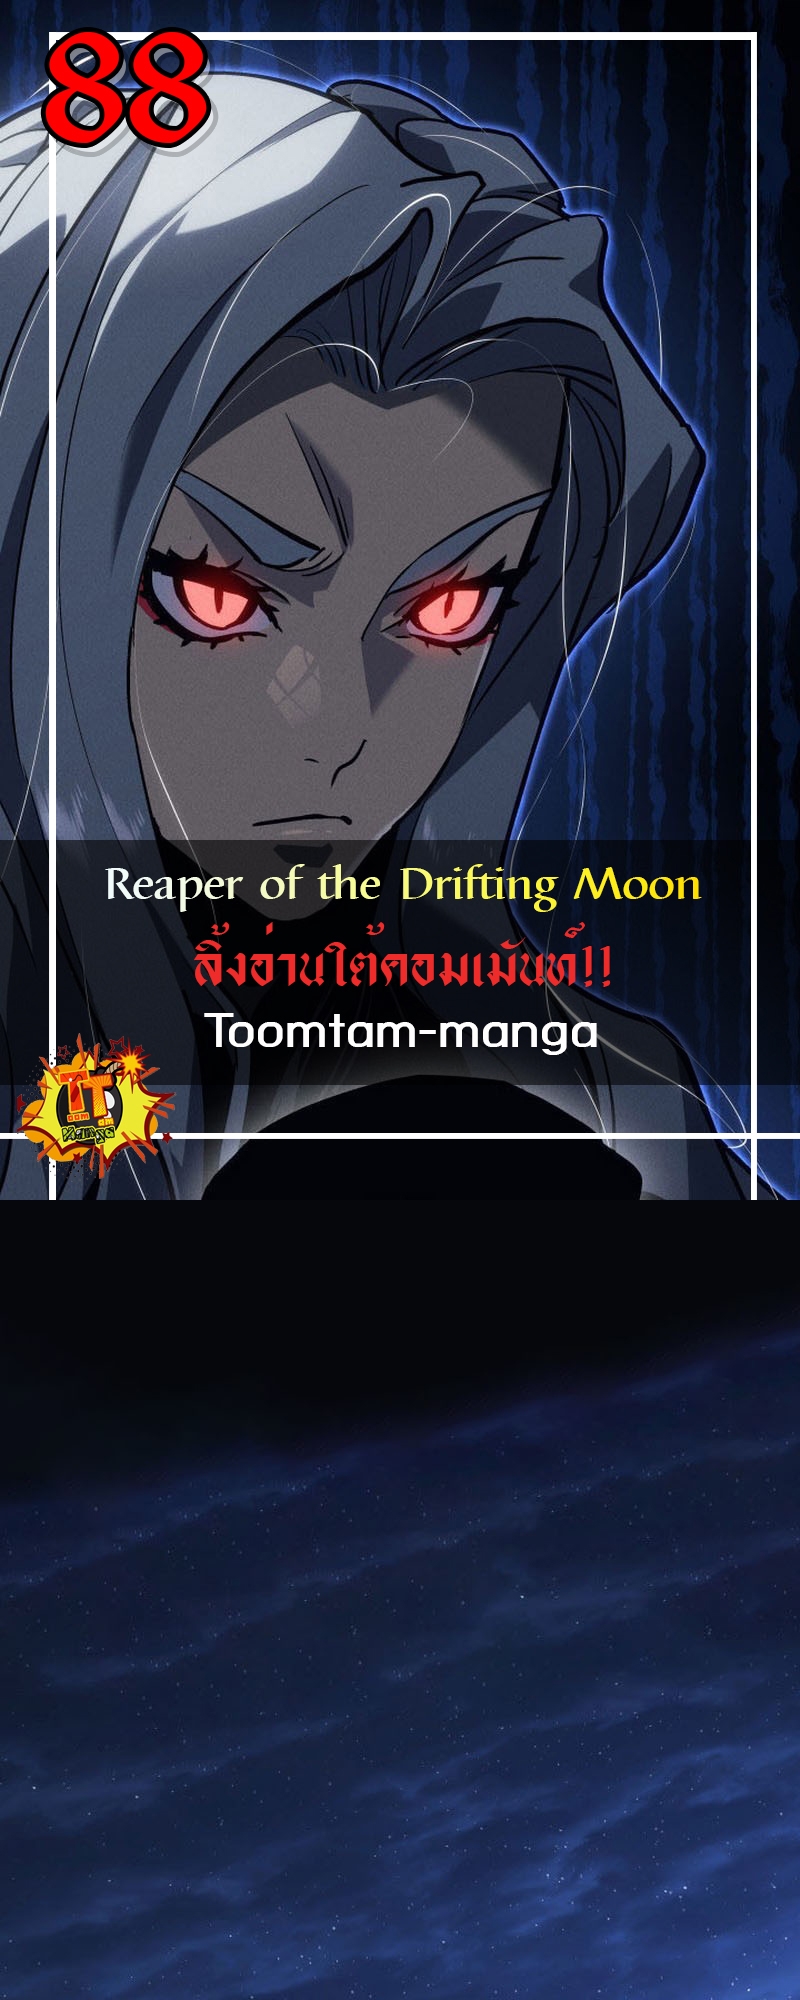 Reaper of the Drifting Moon 88 16 05 25670001